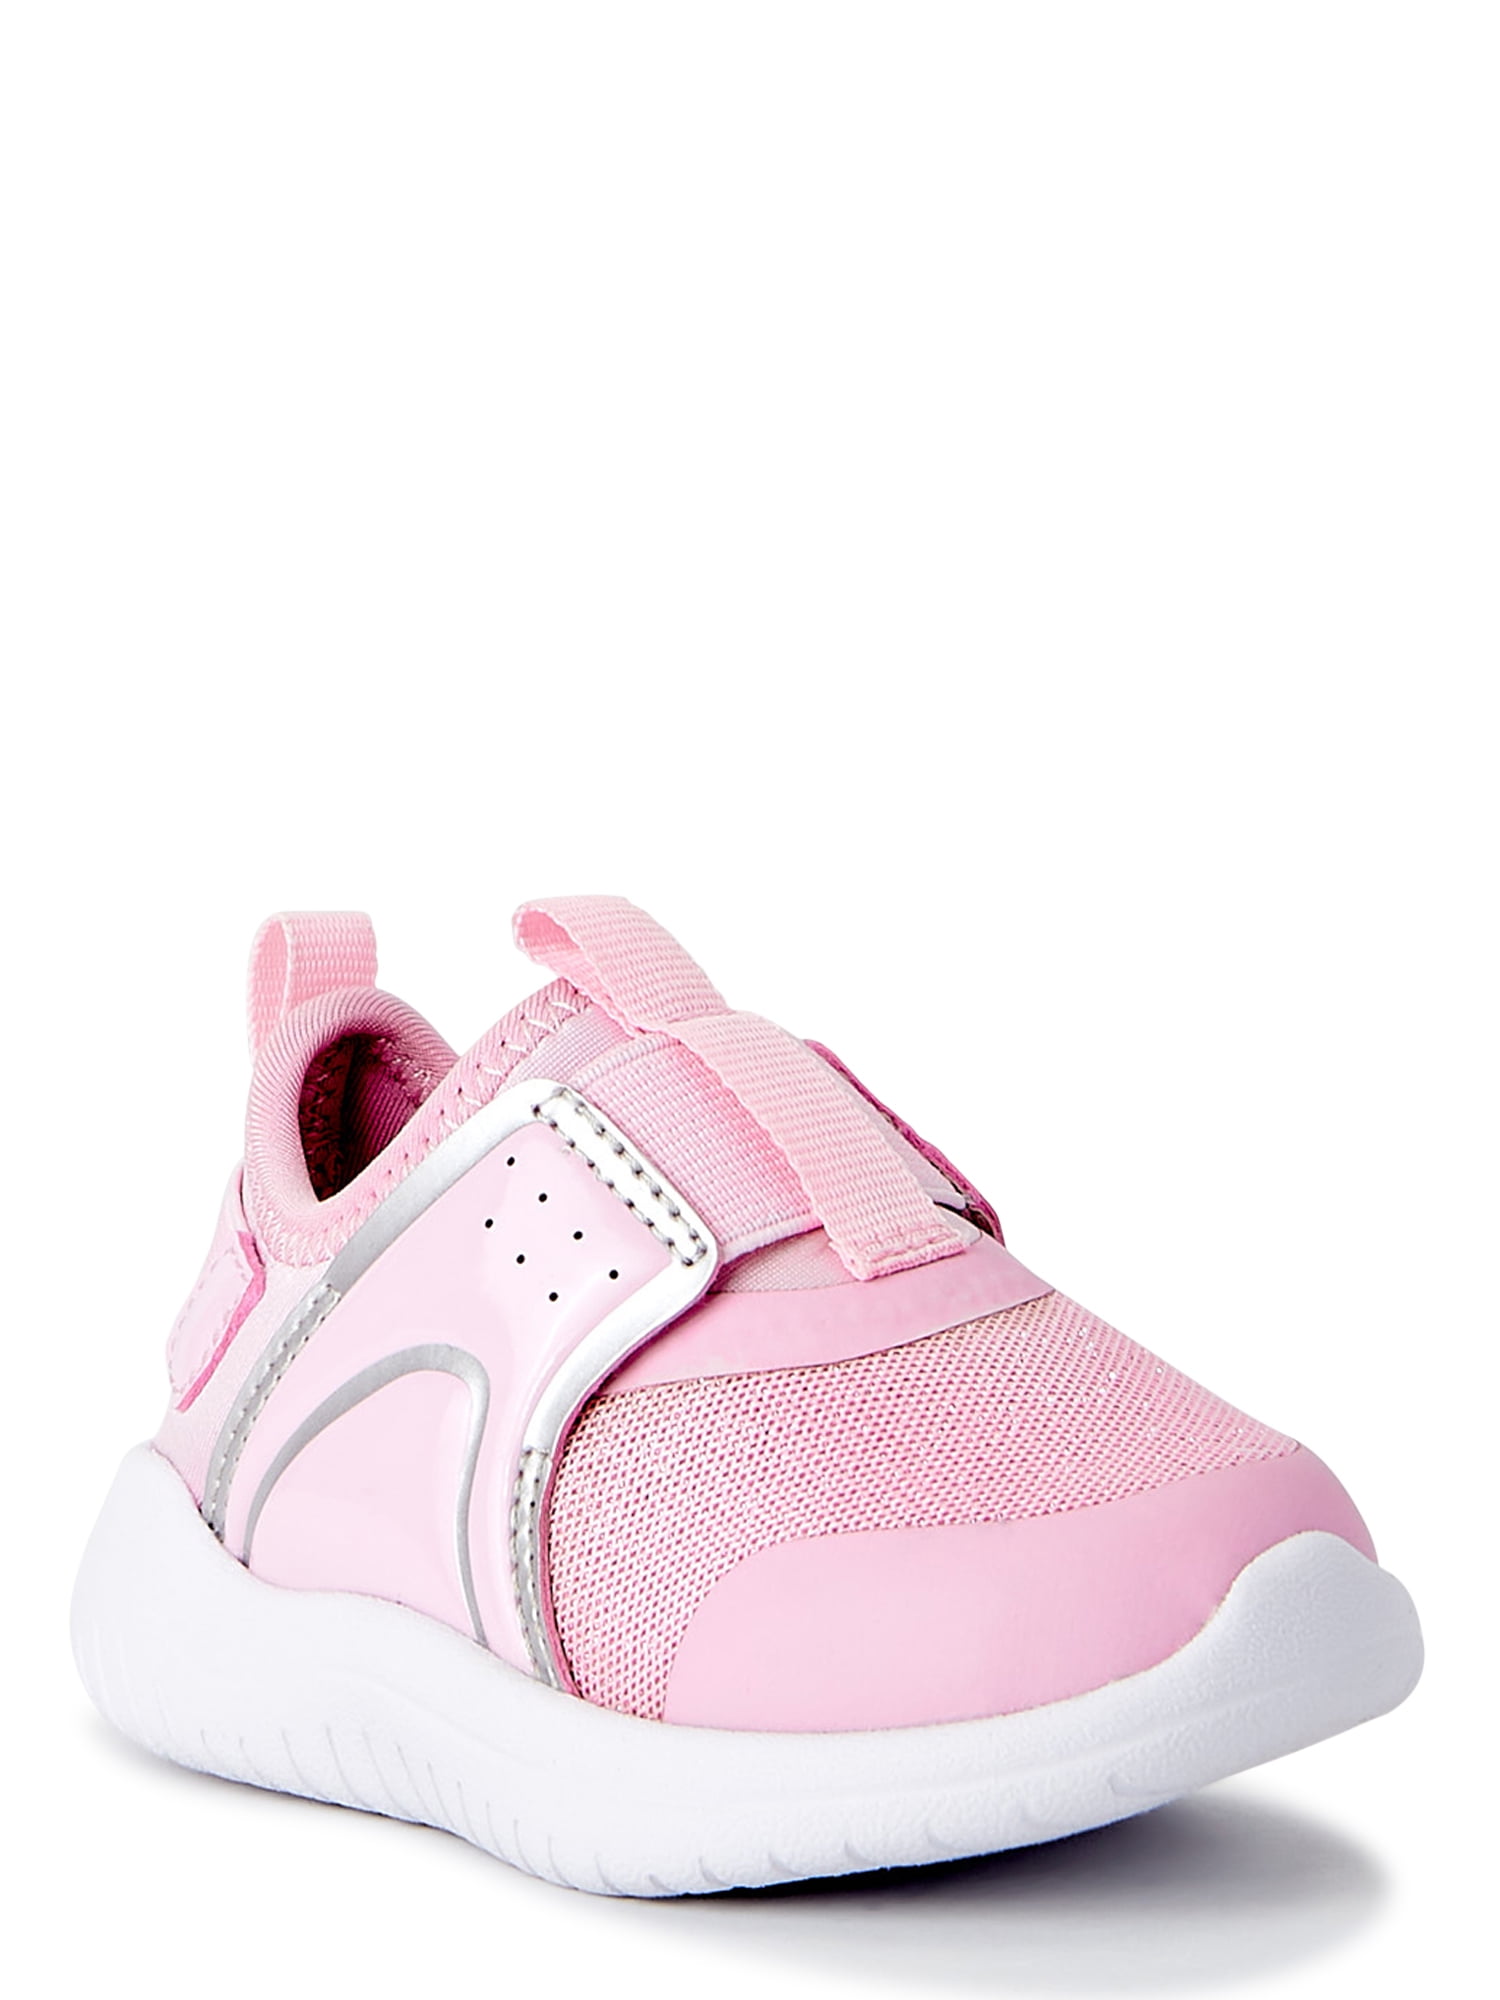 Athletic Works Baby Girls’ Step-In Sneakers, Sizes 2-6